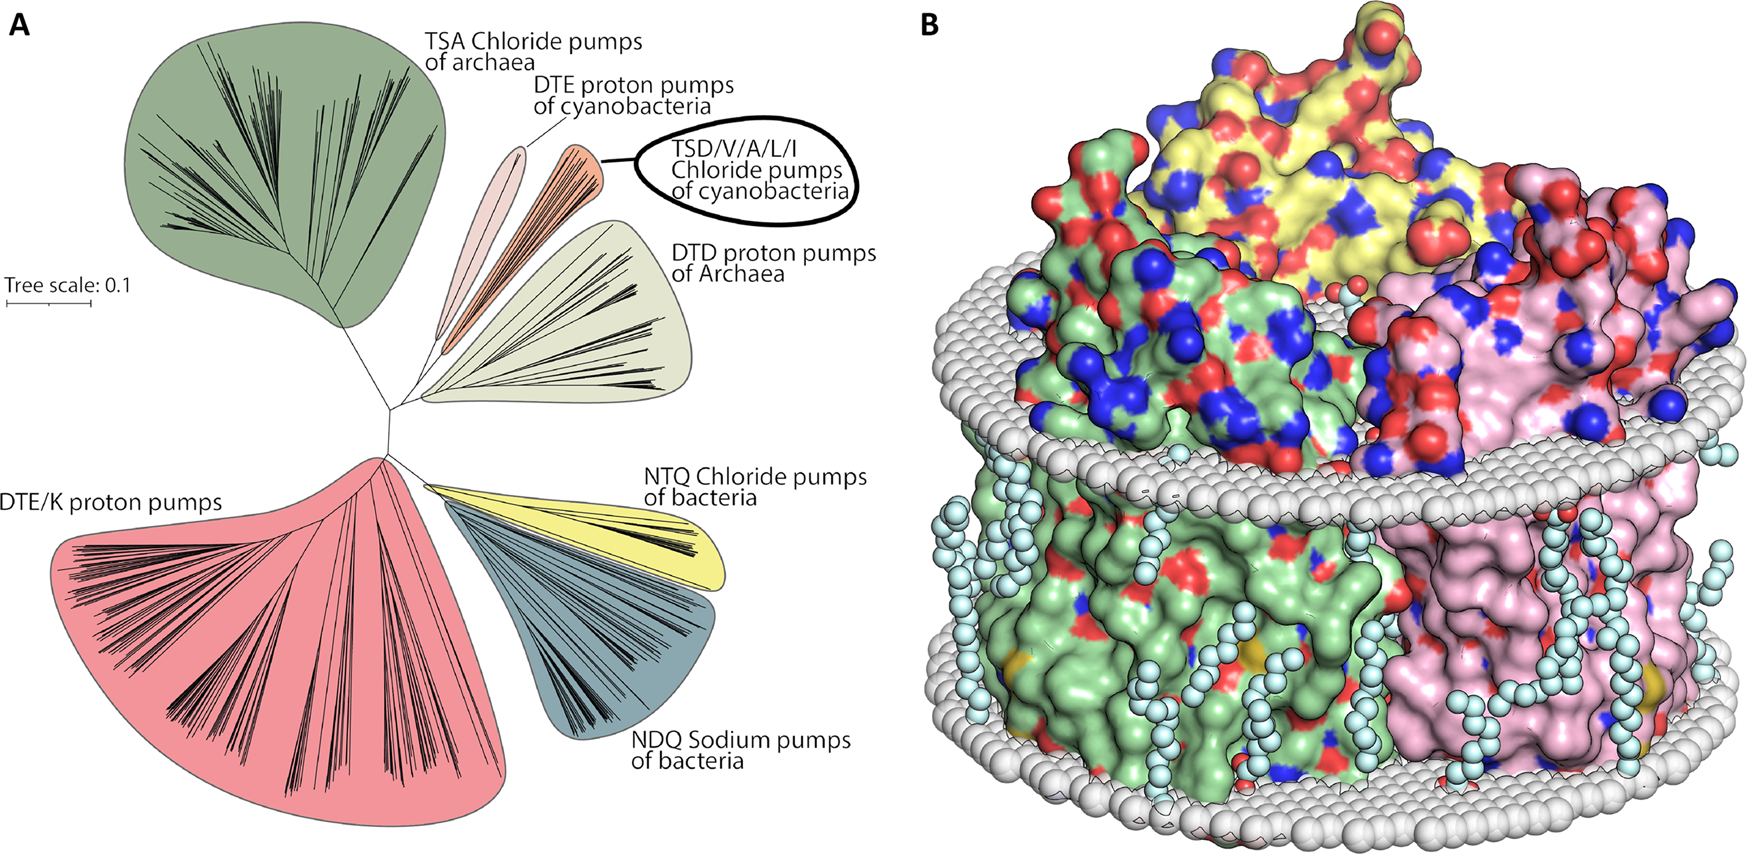 Structural insights into light-driven anion pumping in cyanobacteria |  Nature Communications